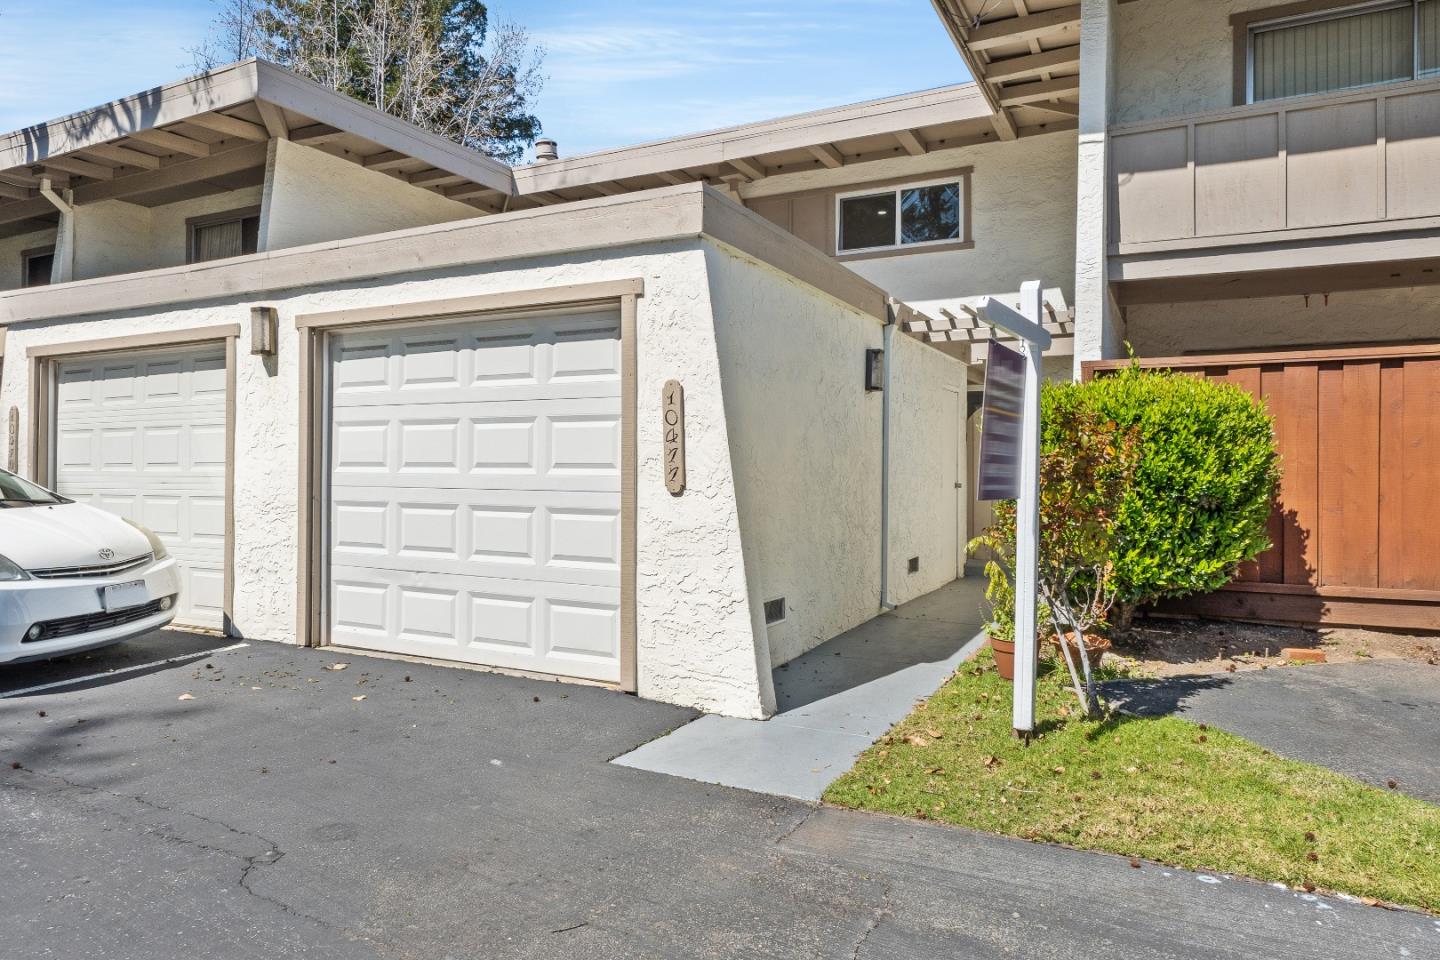 Photo of 10477 Mary Ave in Cupertino, CA